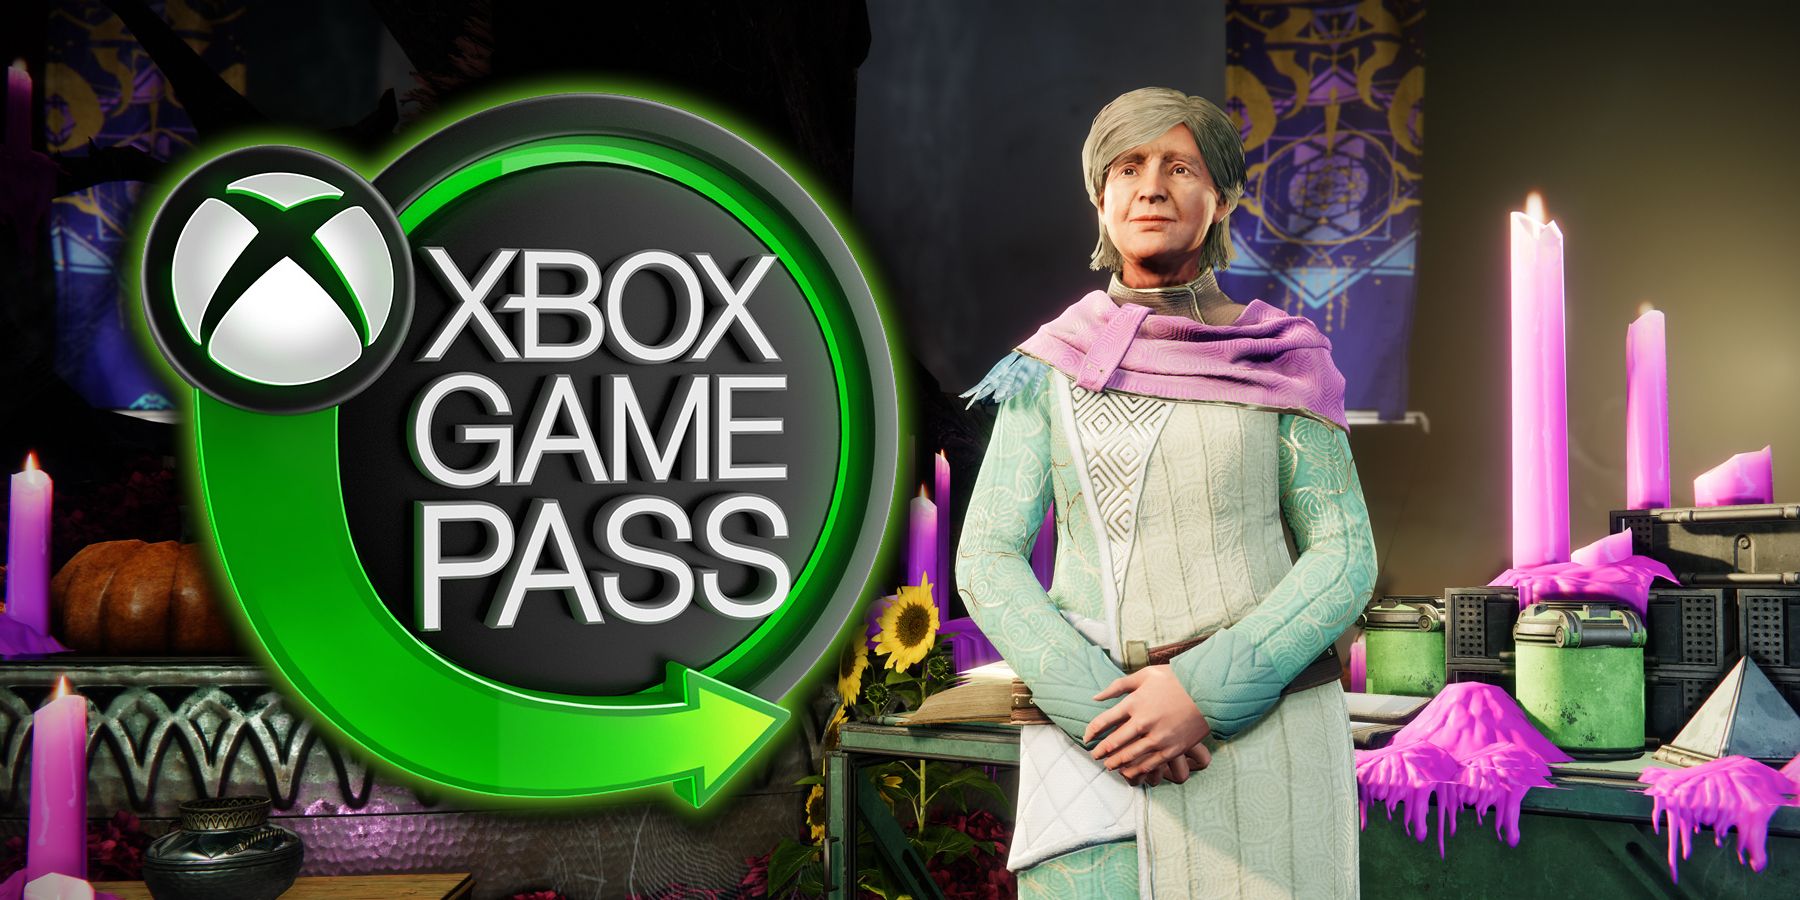 An Xbox Game Pass is imposed on a screenshot of Eva Levante from Destiny 2.